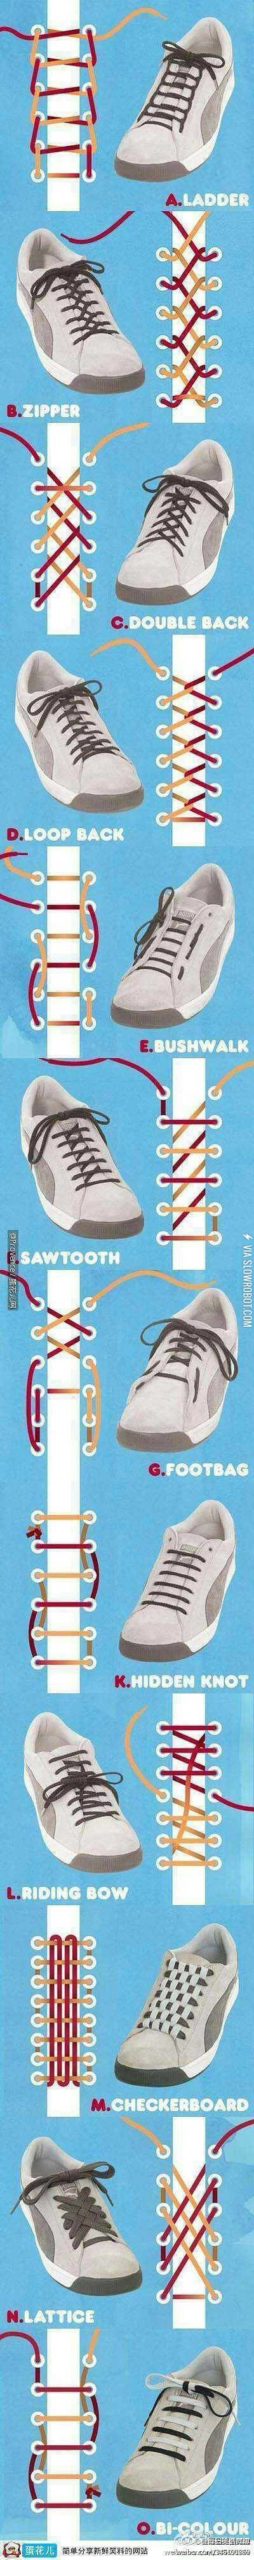 12+Ways+to+Tie+Your+Shoe+Laces